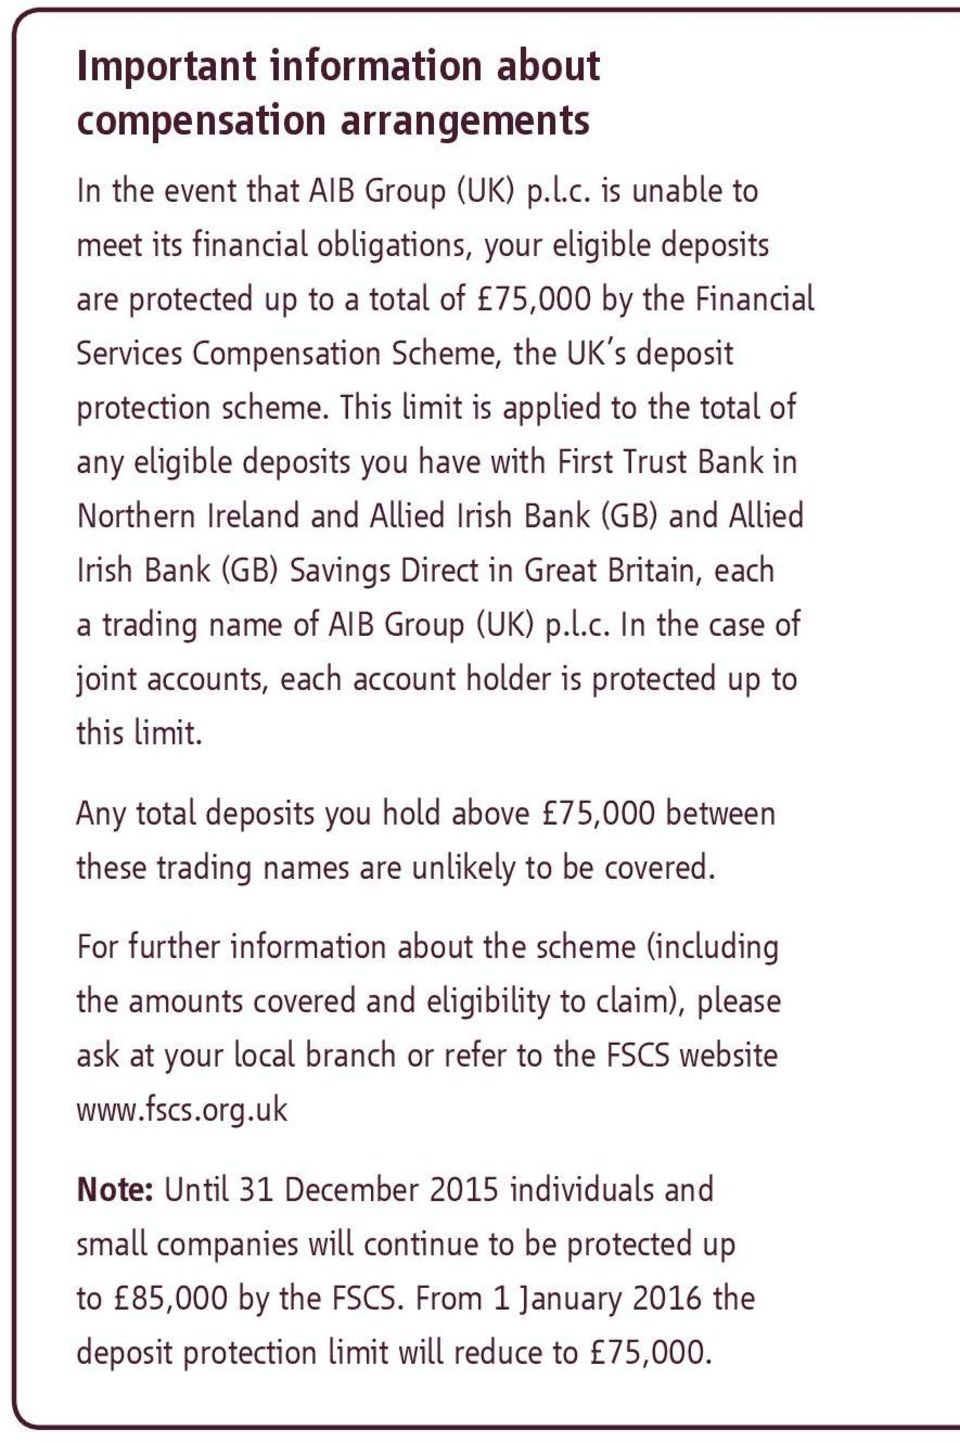 is unable to meet its financial obligations, your eligible deposits are protected up to a total of 75,000 by the Financial Services Compensation Scheme, the UK s deposit protection scheme.